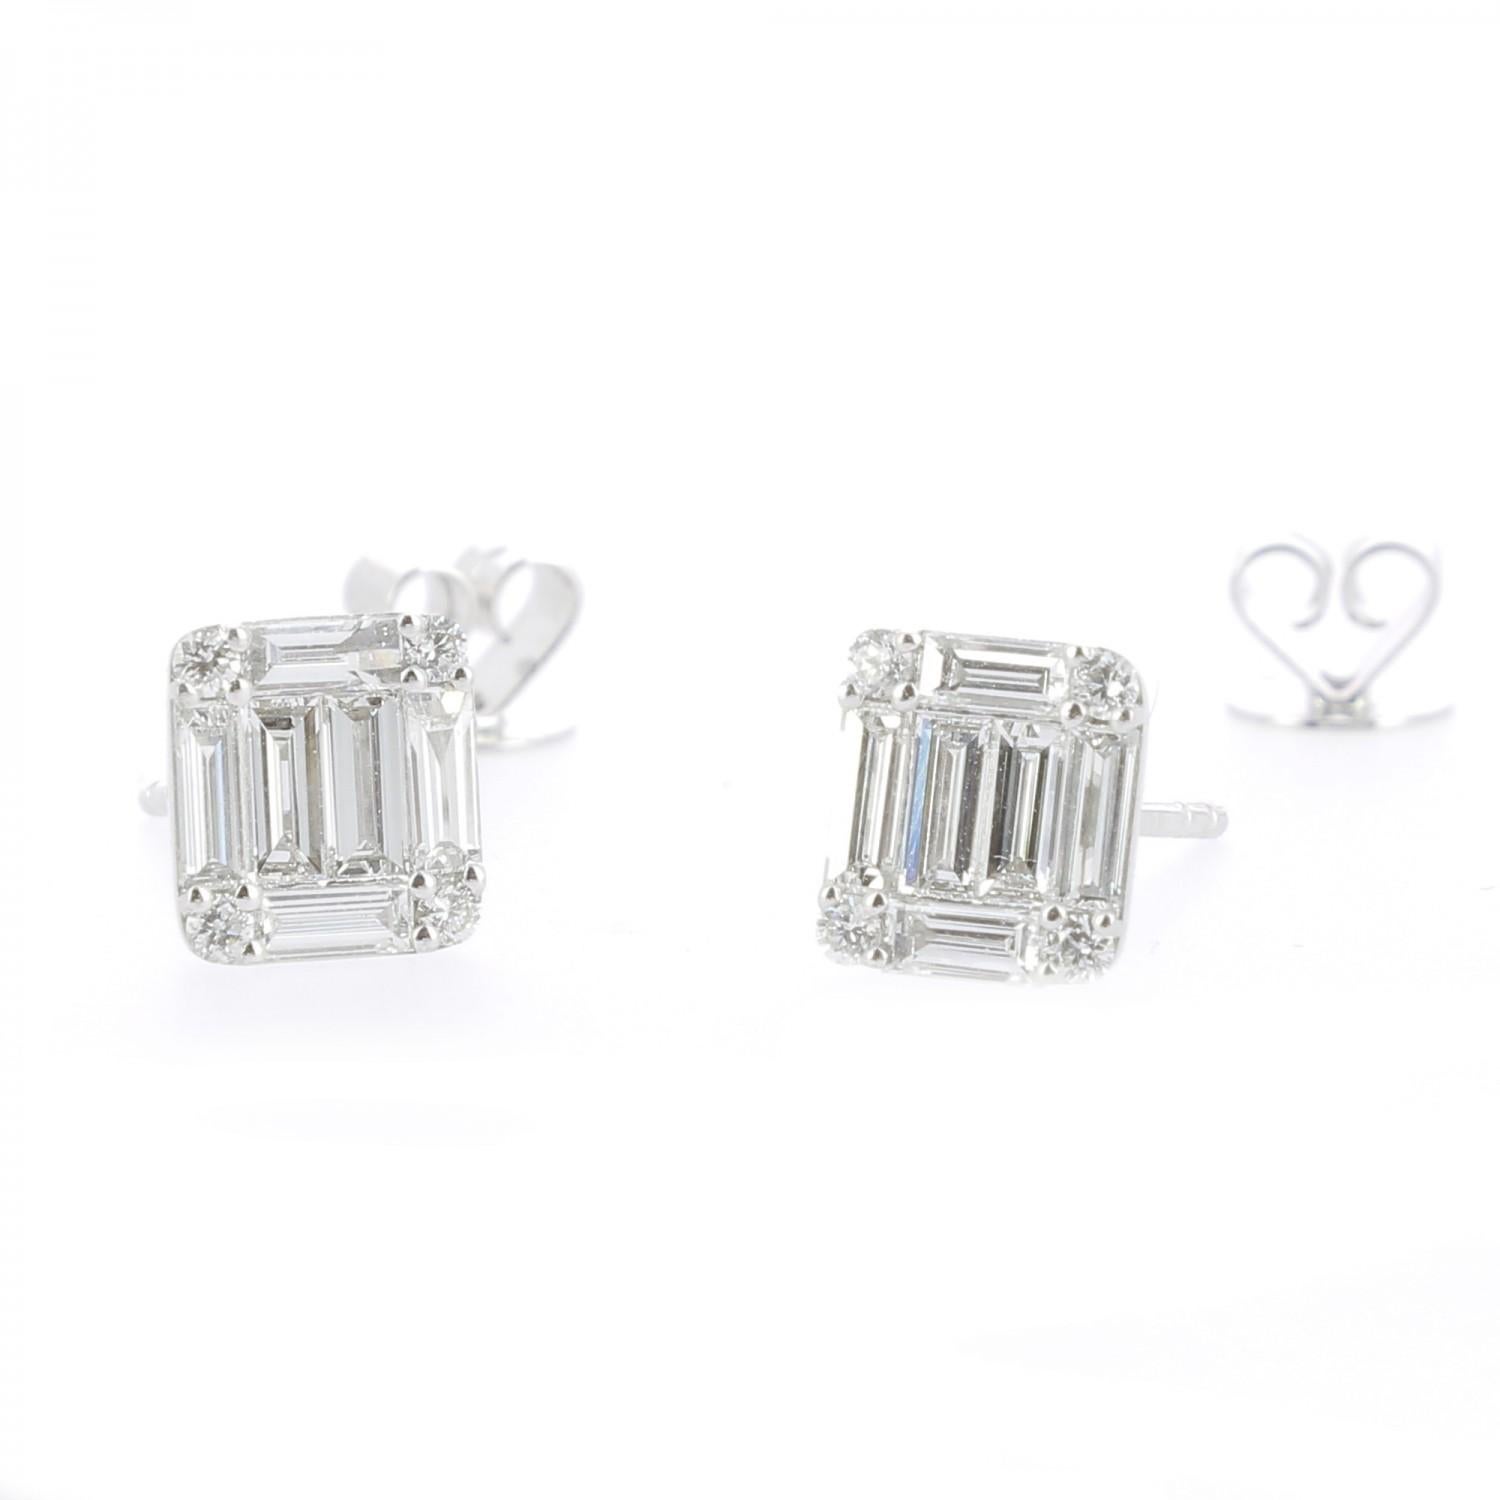 A wonderful Illusion Emerald-Cut Diamond Earrings, set with 12 Baguettes Diamonds weighing 0.68 Carats and 12 Rounds Diamonds weighing 0.09 Carats.
Totally the Fashion Diamond Earrings weights 0.77 Carats.
The Diamonds are GVS qualities.
The